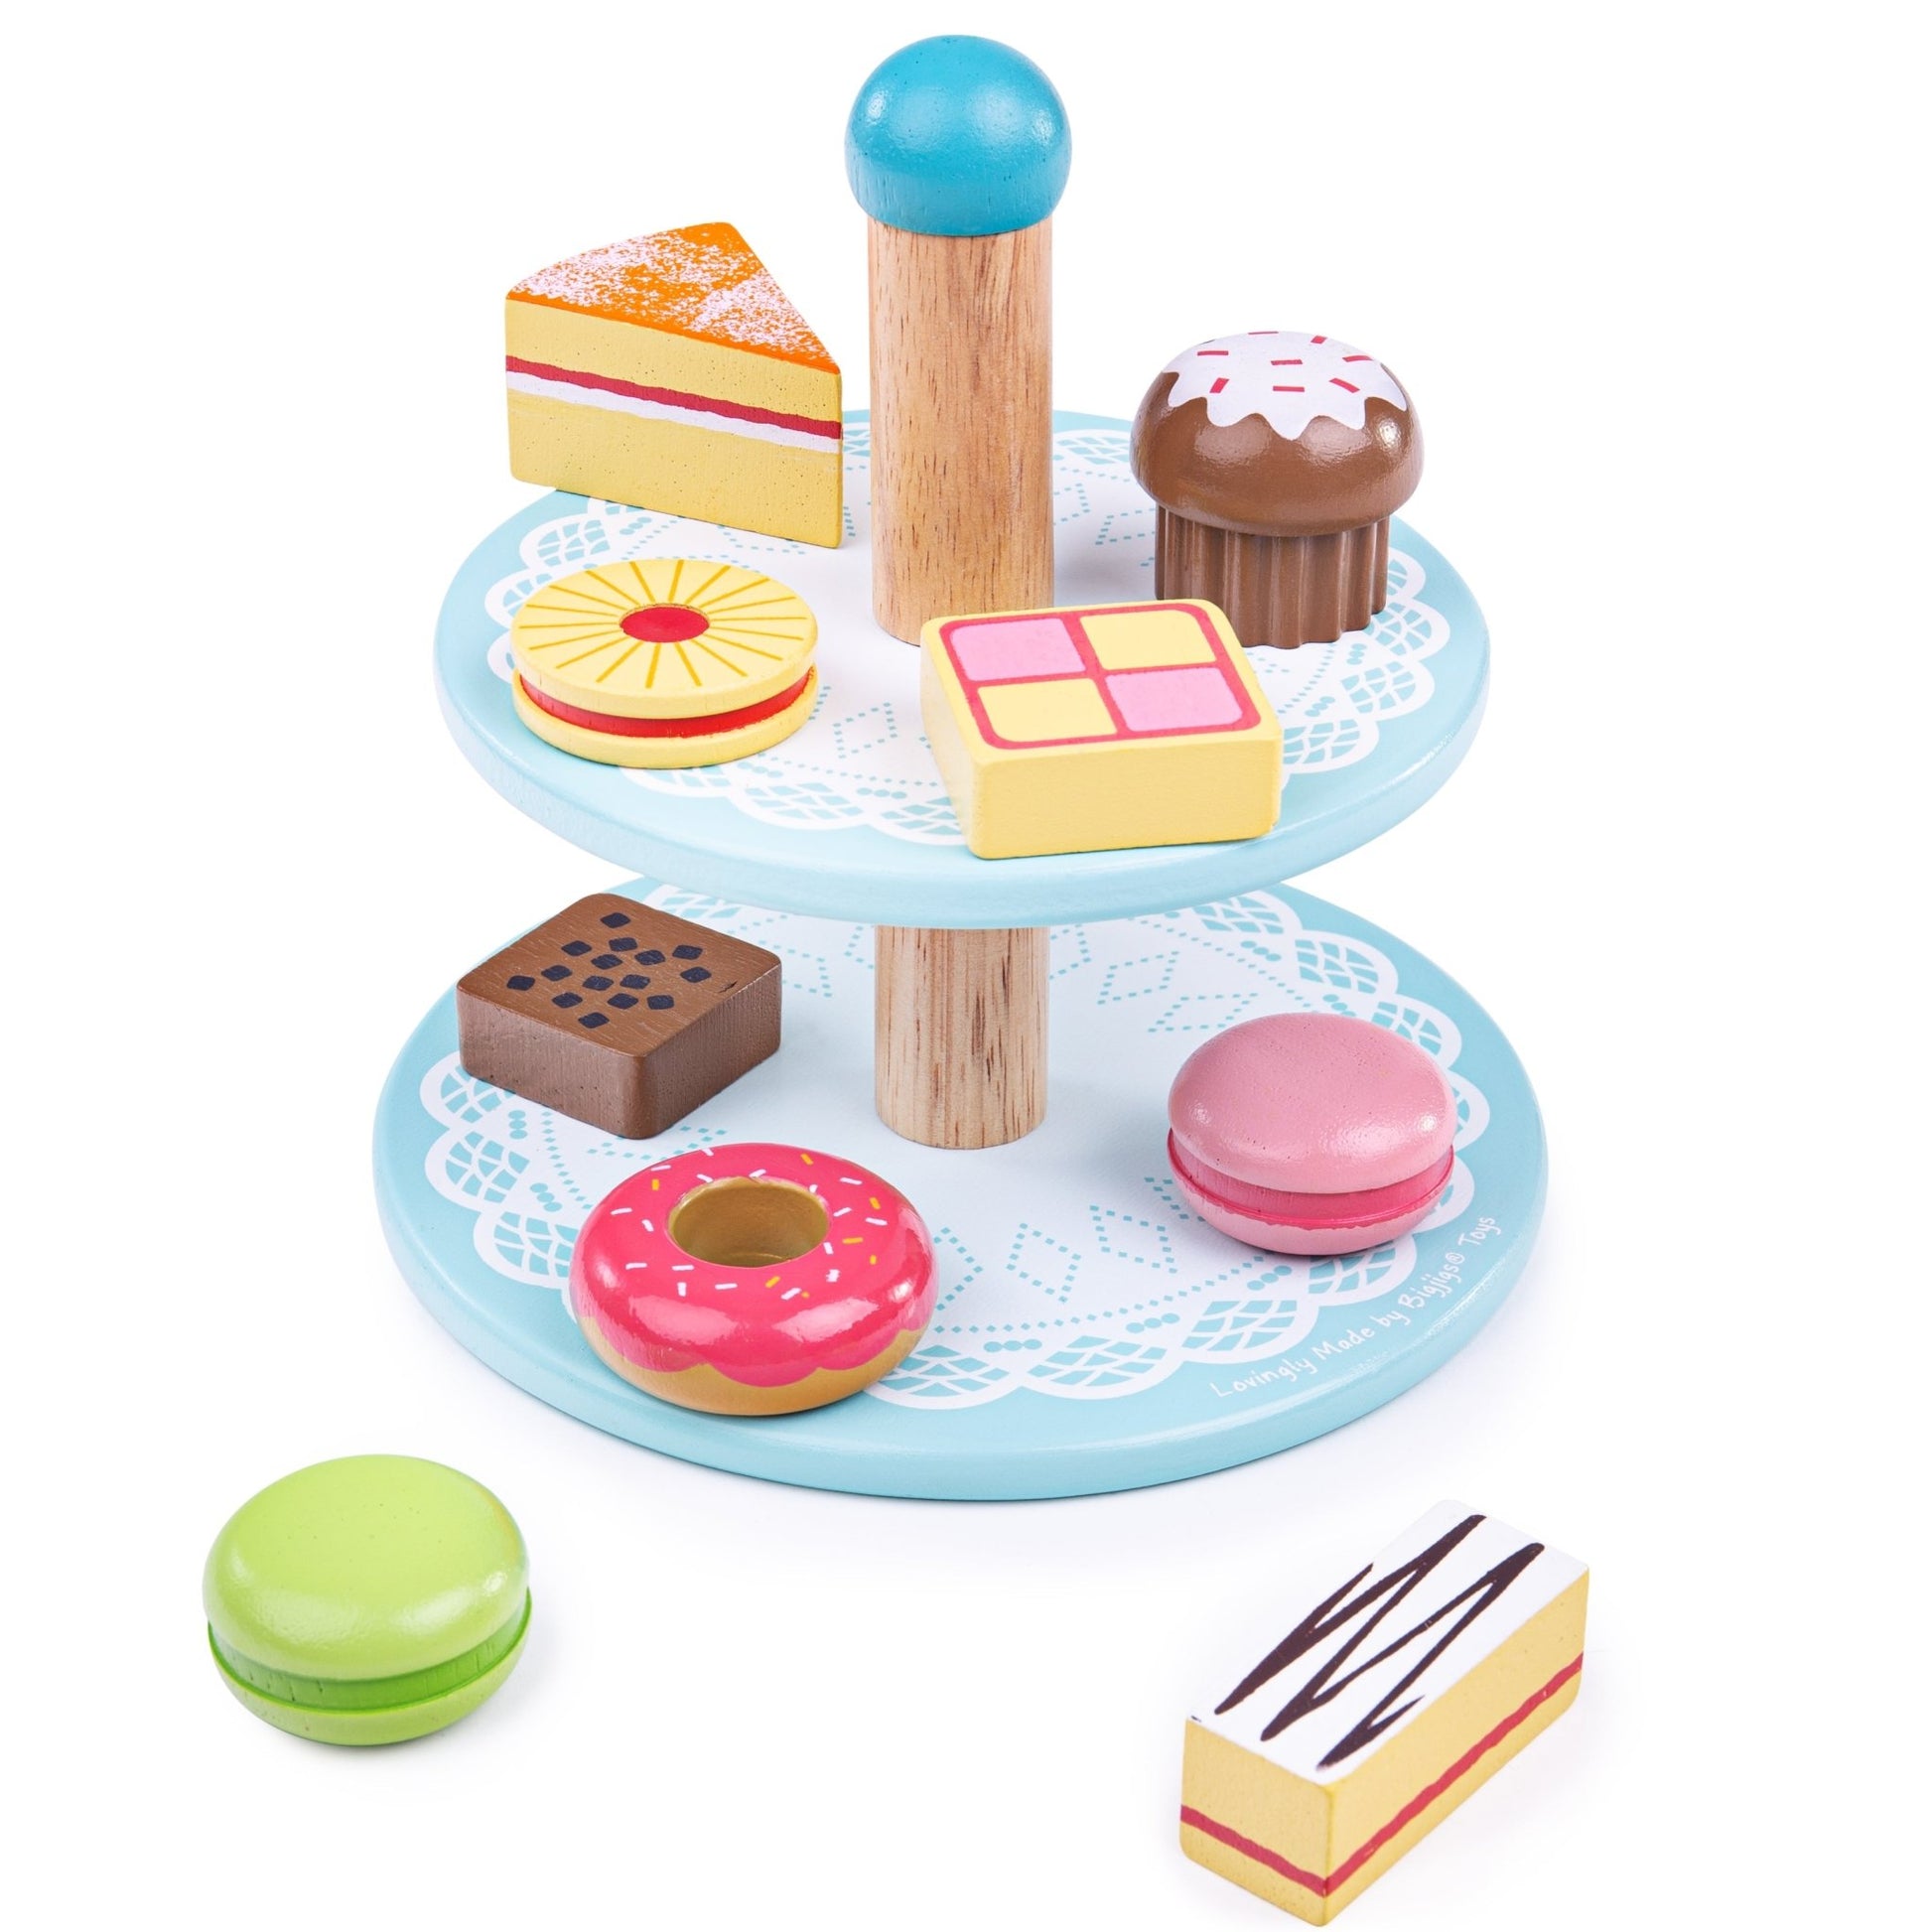 Cake Stand With Cakes - Toby Tiger